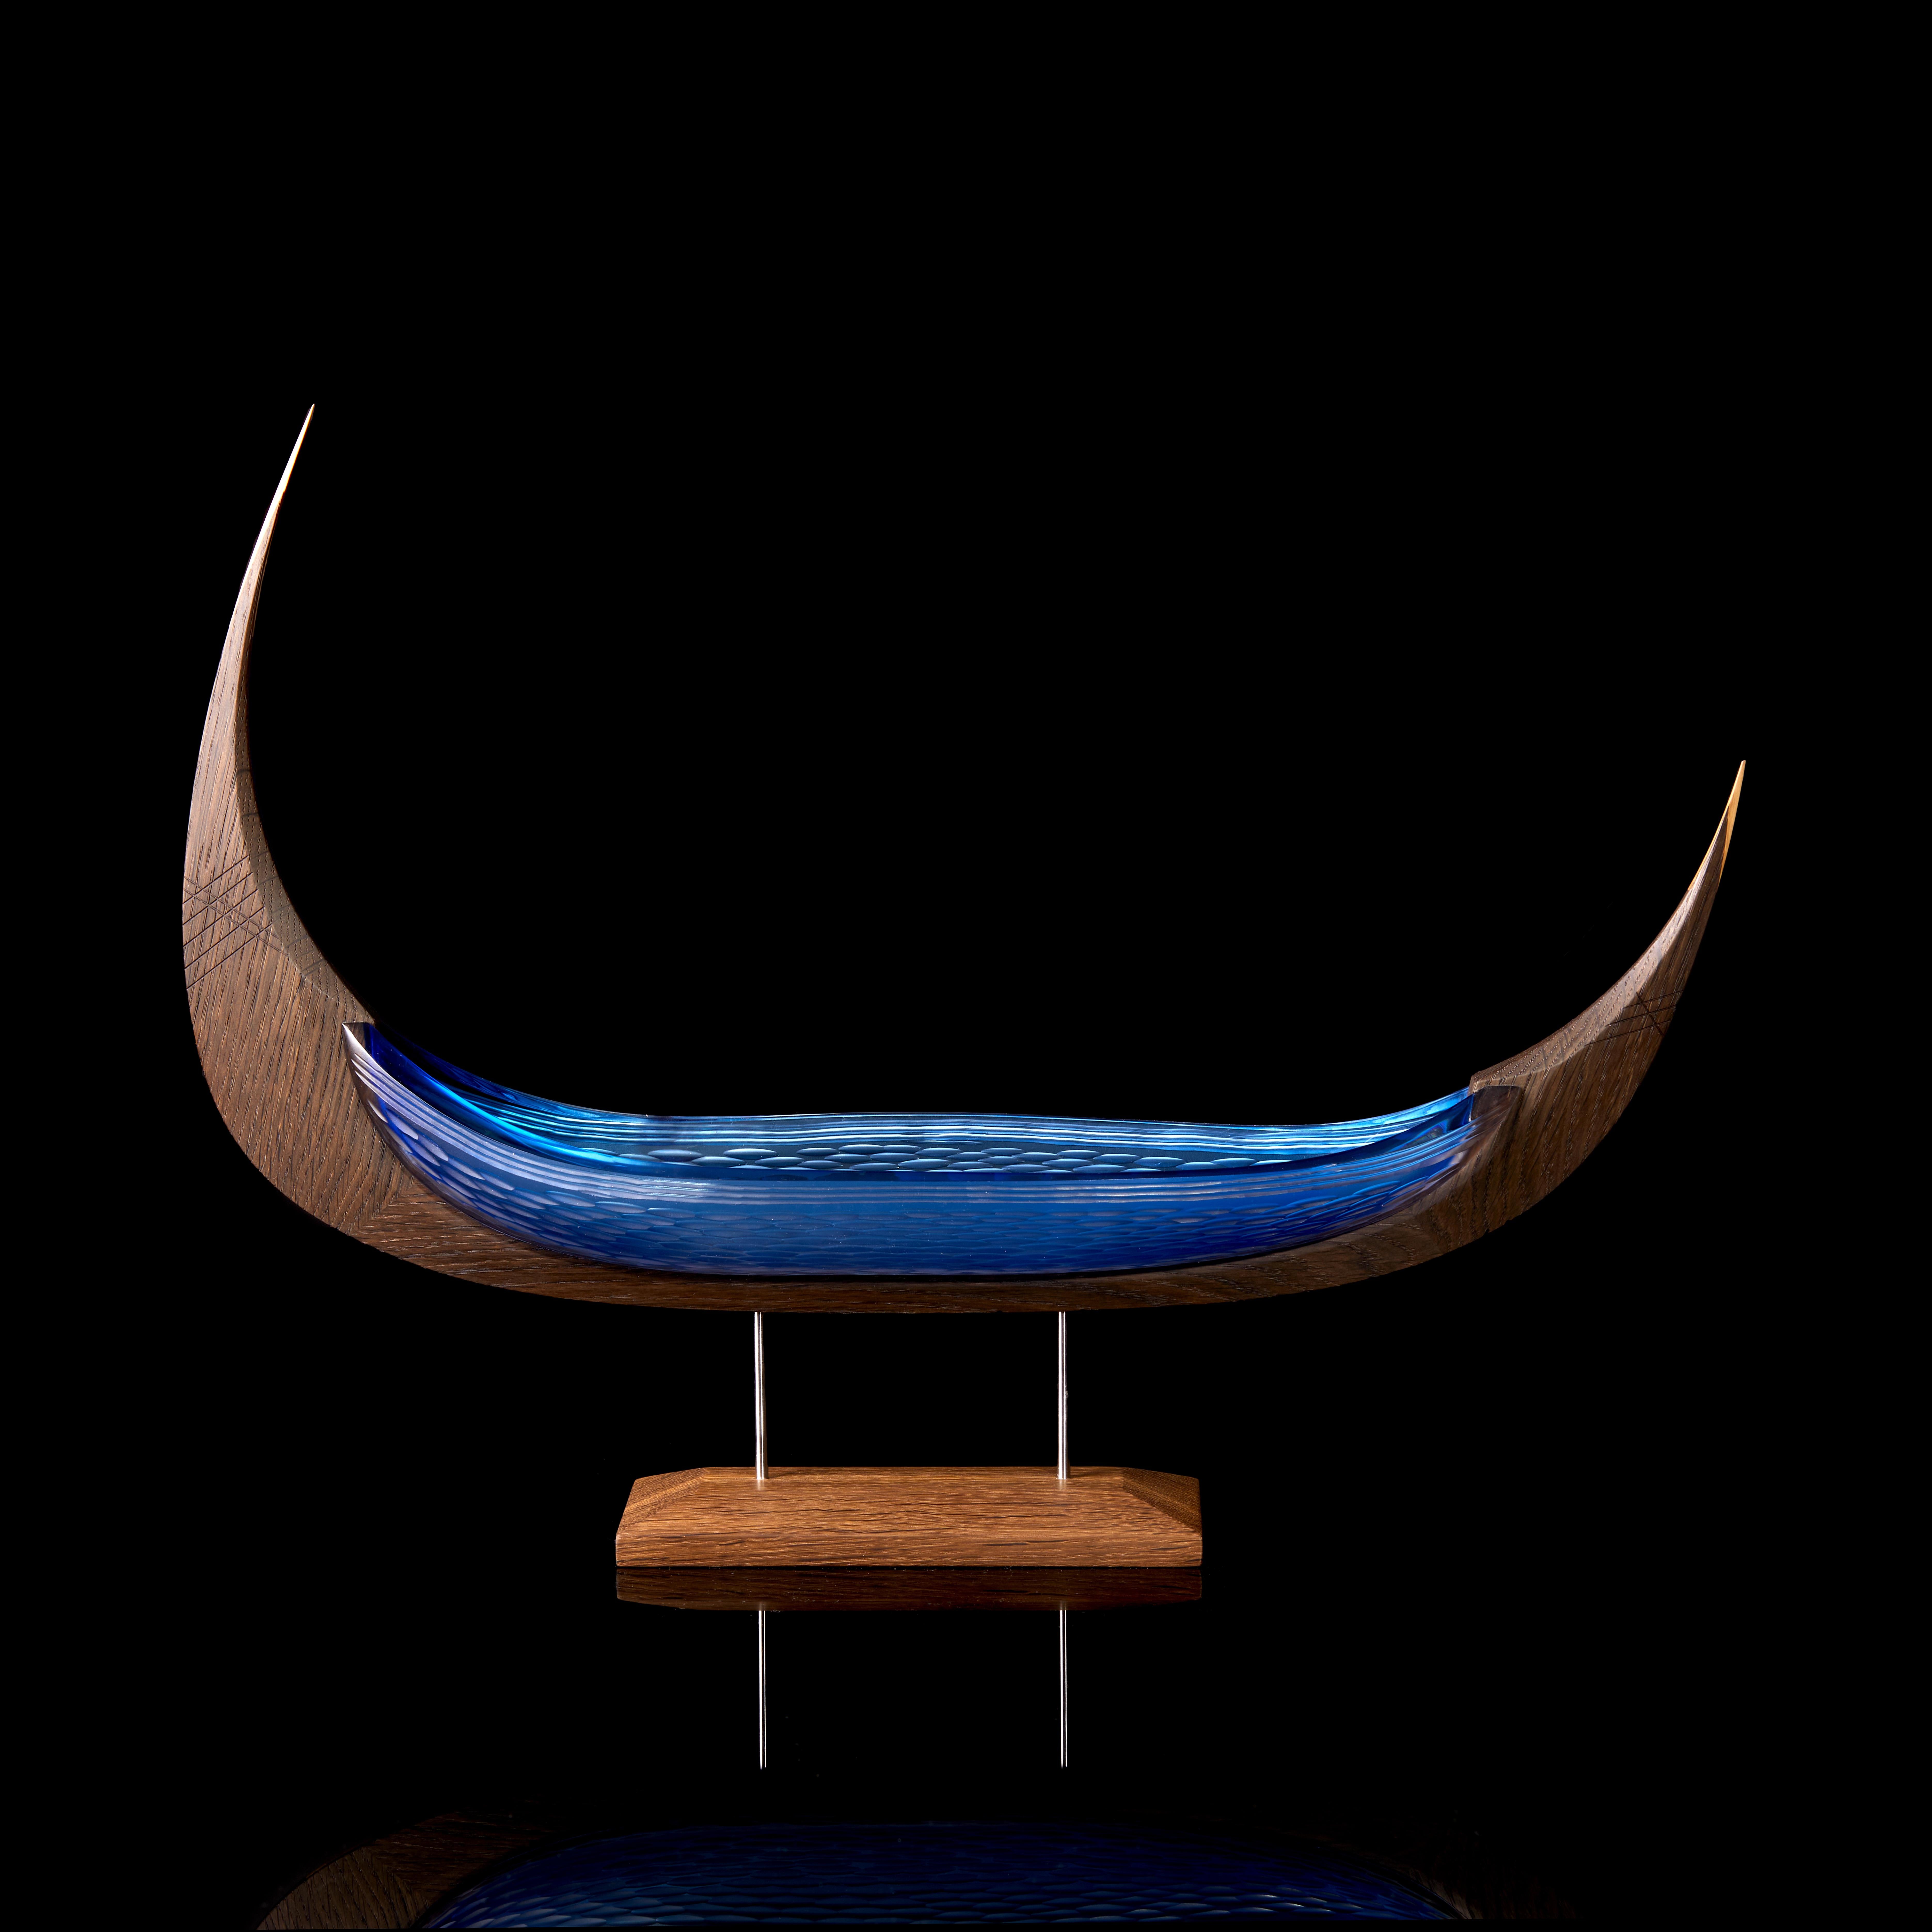 'Njal' from the Glasskibe Collection is a unique glass and oak sculpture by the Danish and British artists, Backhaus & Brown and Egeværk.

The title explained by the artists;

